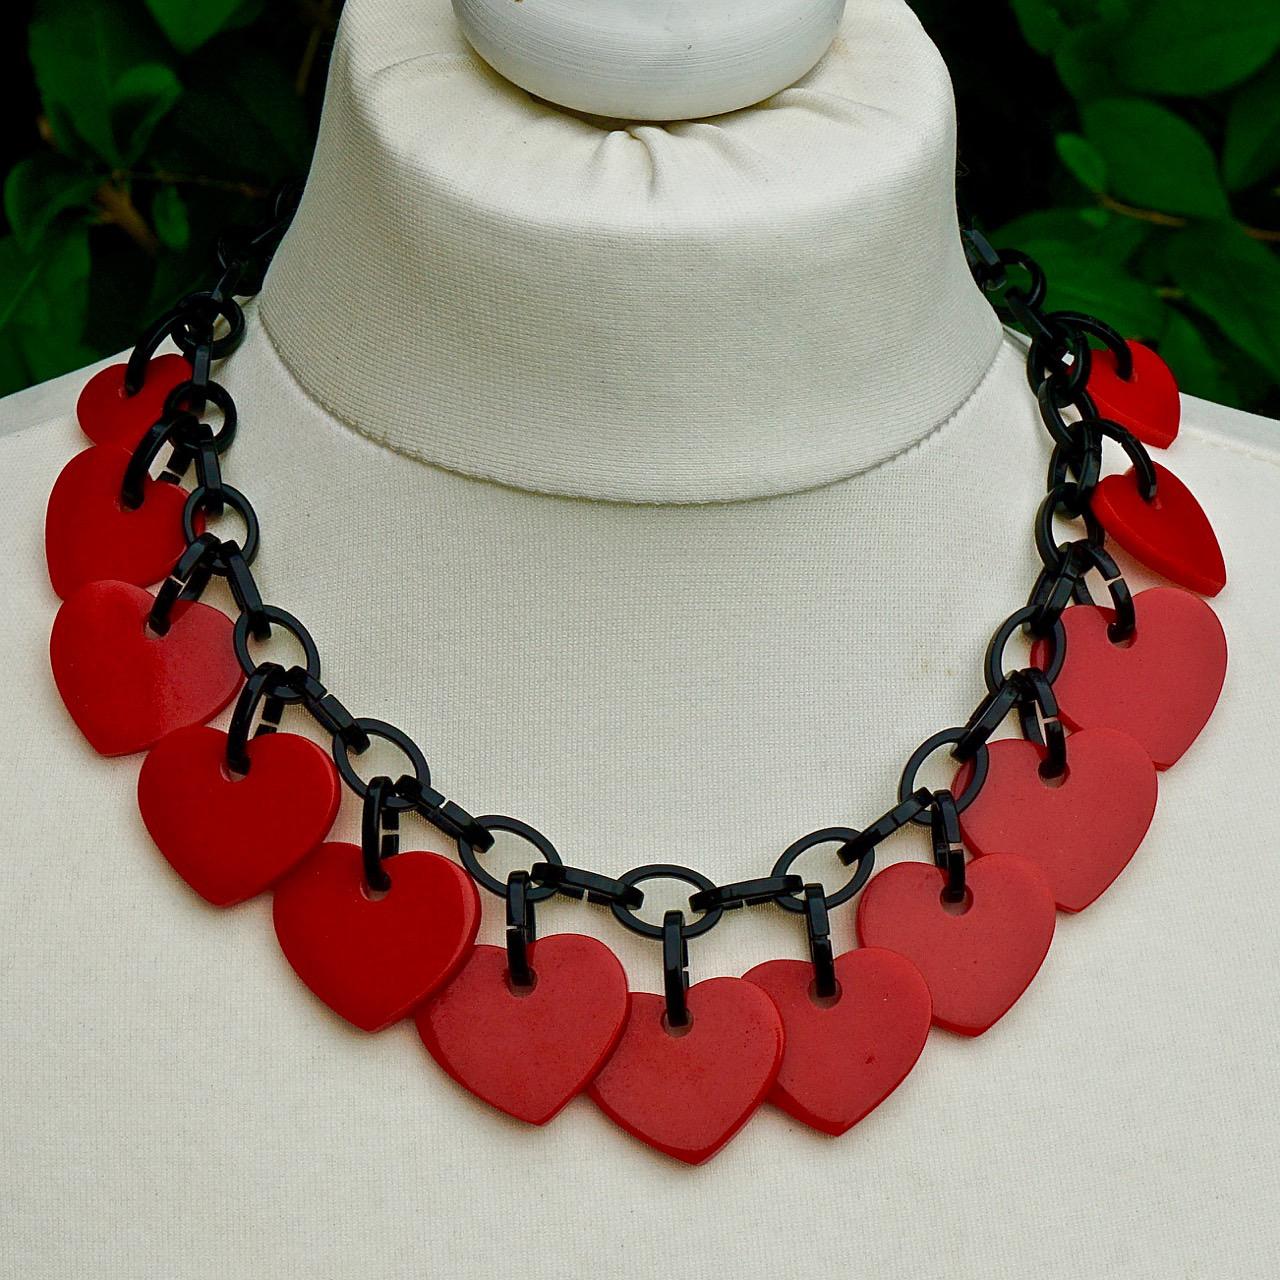 Marion Godart fantastic plastic red heart drops and black link chain necklace, with a hook clasp. The necklace is length 53cm / 20.8 inches. The necklace is in very good condition.

This is a stylish and fun statement necklace from Paris.